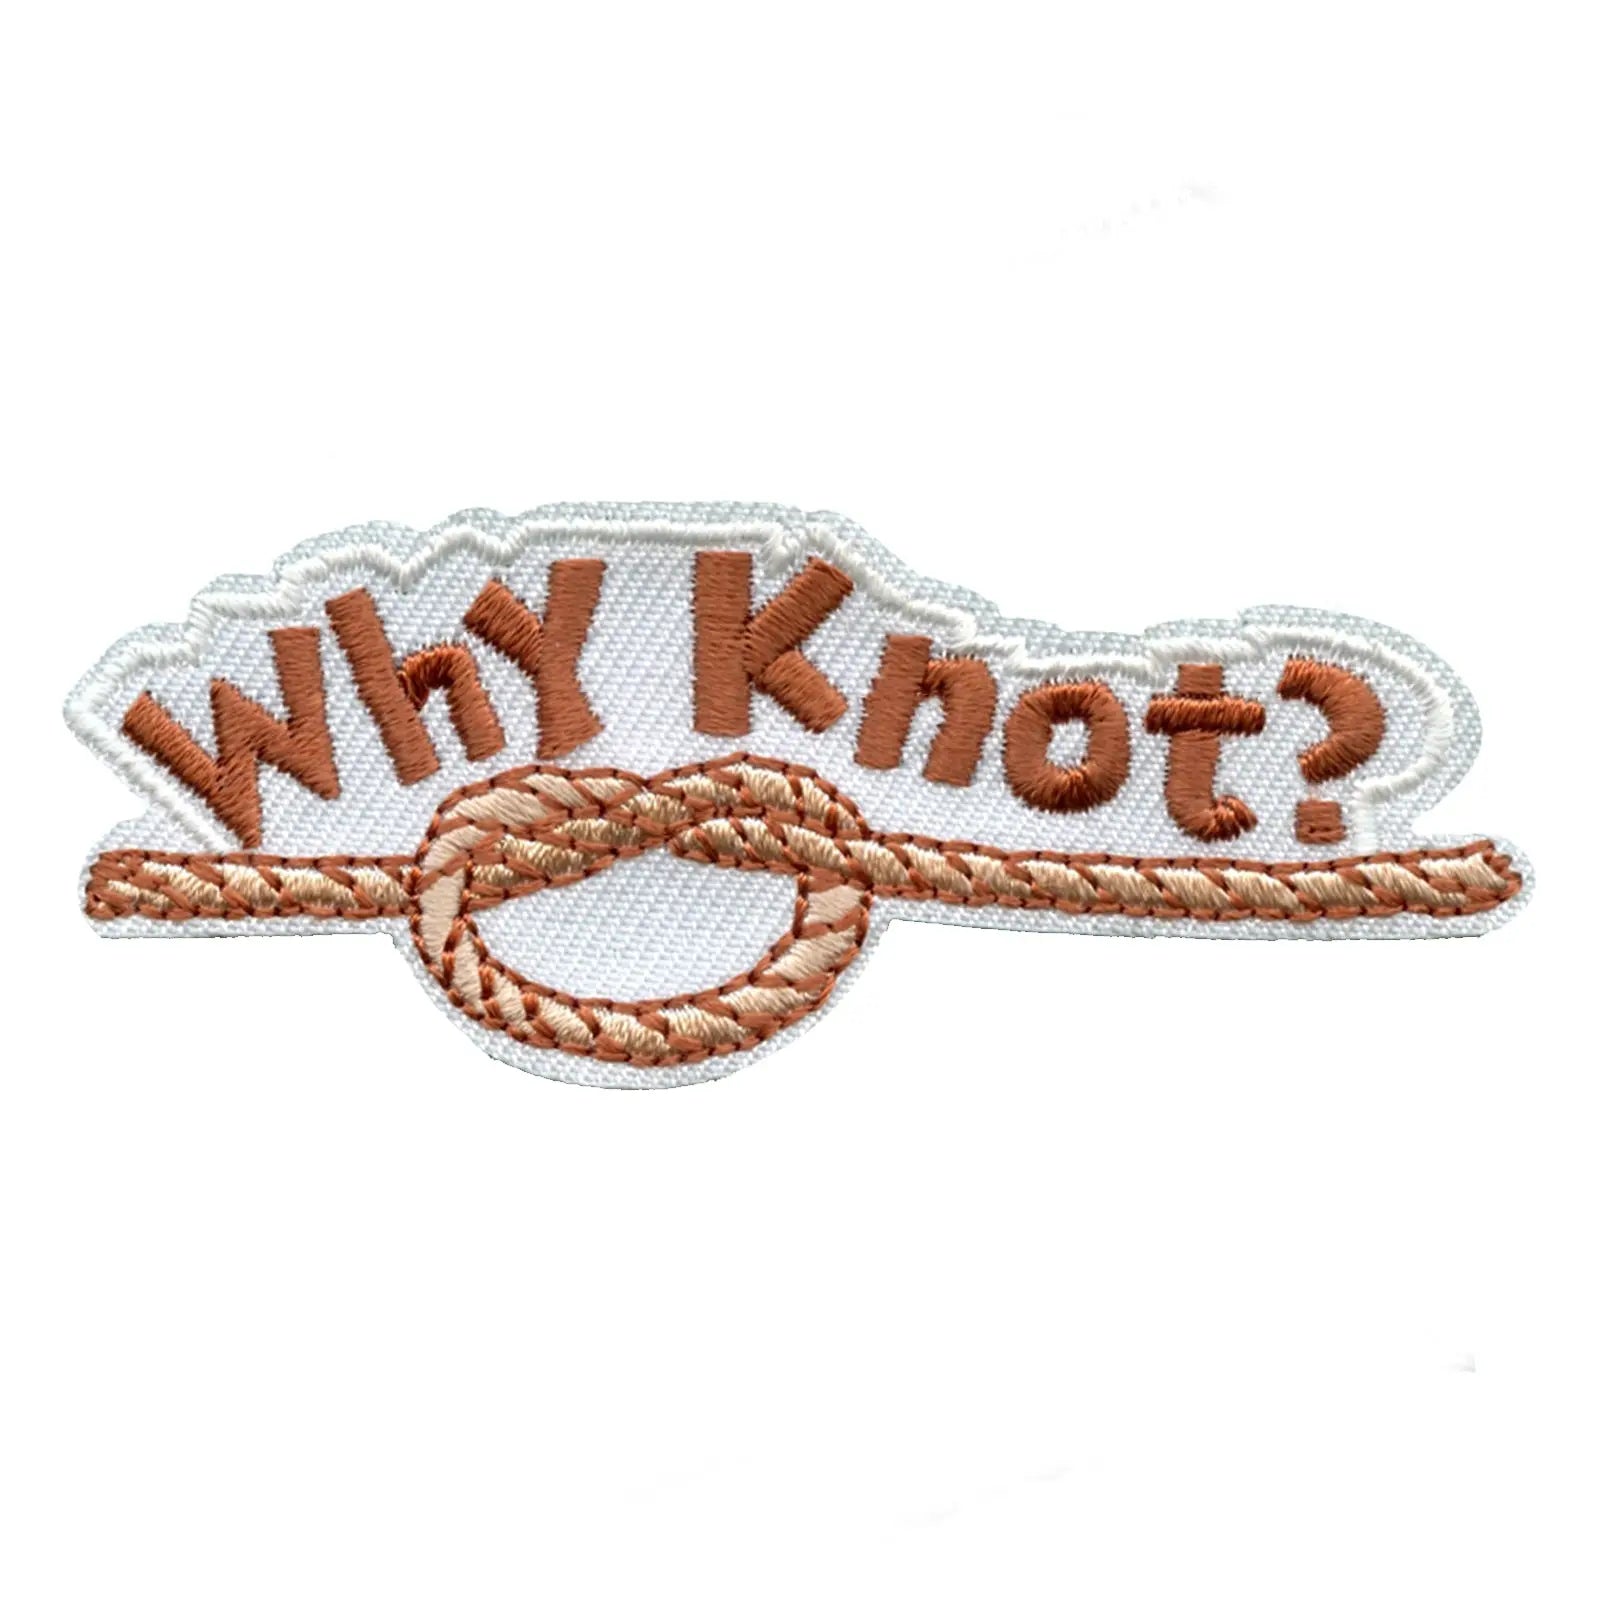 Funny Why Knot? Embroidered Iron On Patch 